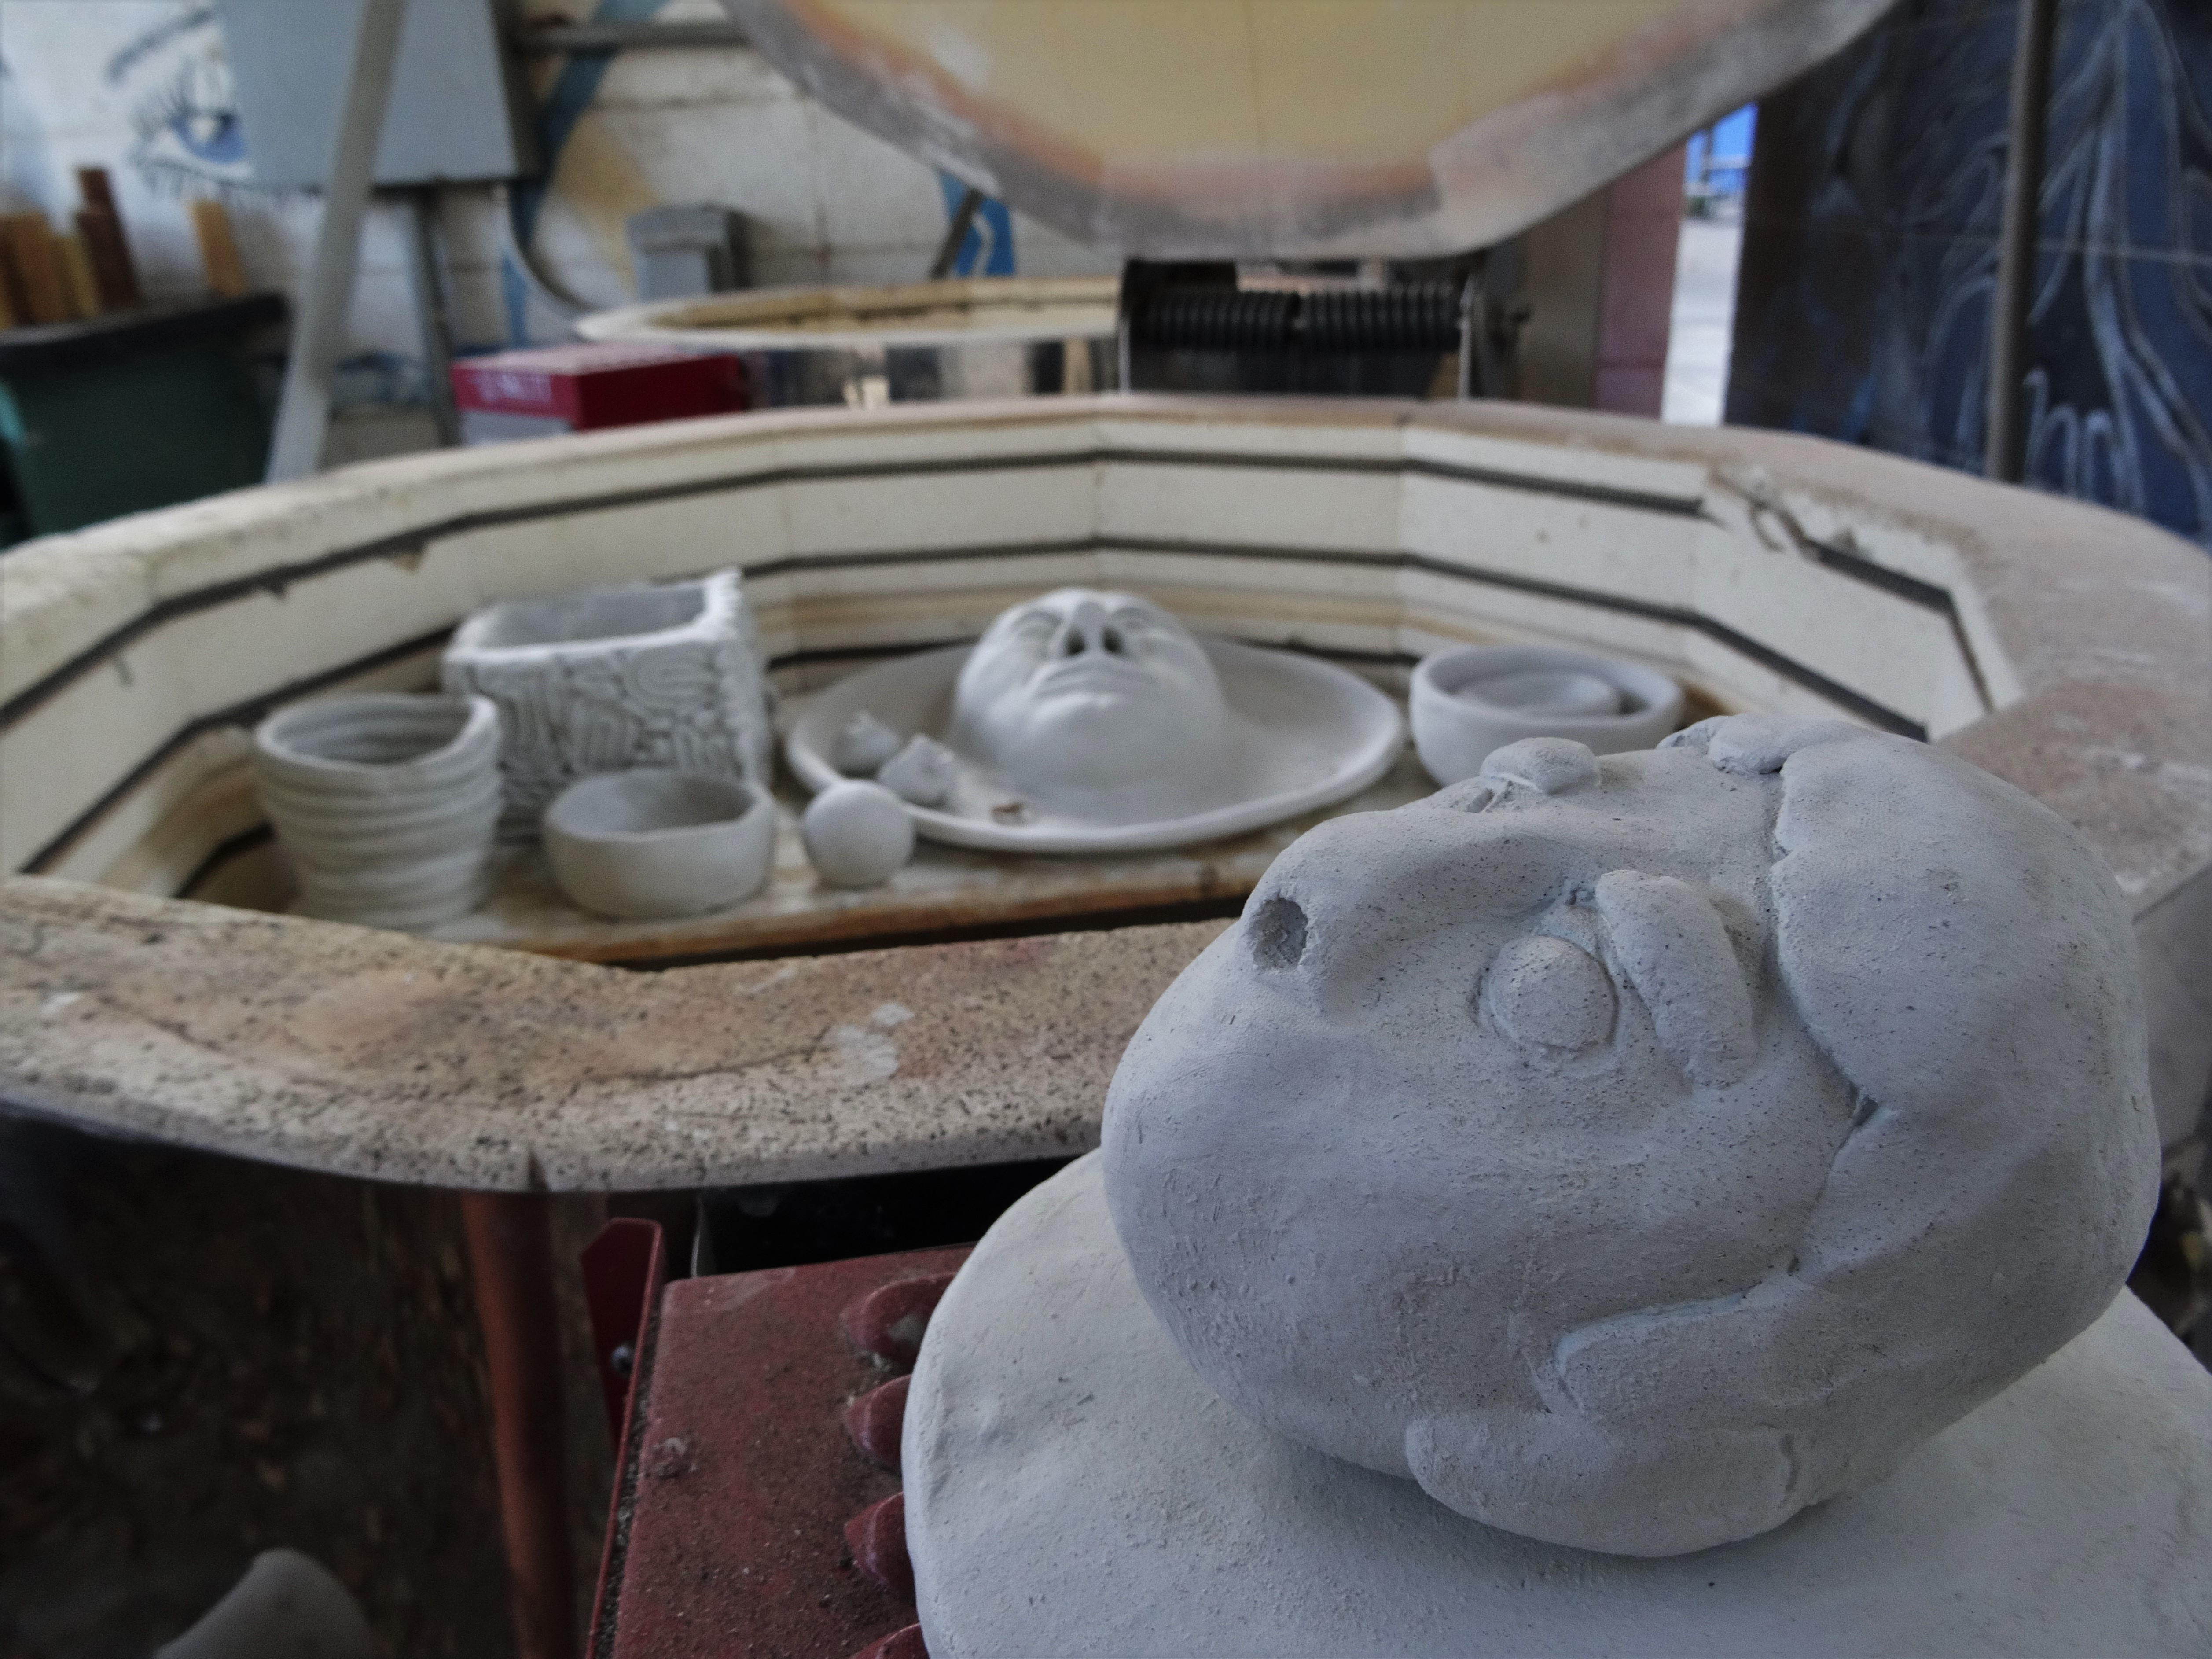 A sculpture that looks like a face sits next to a kiln full of other clay projects.